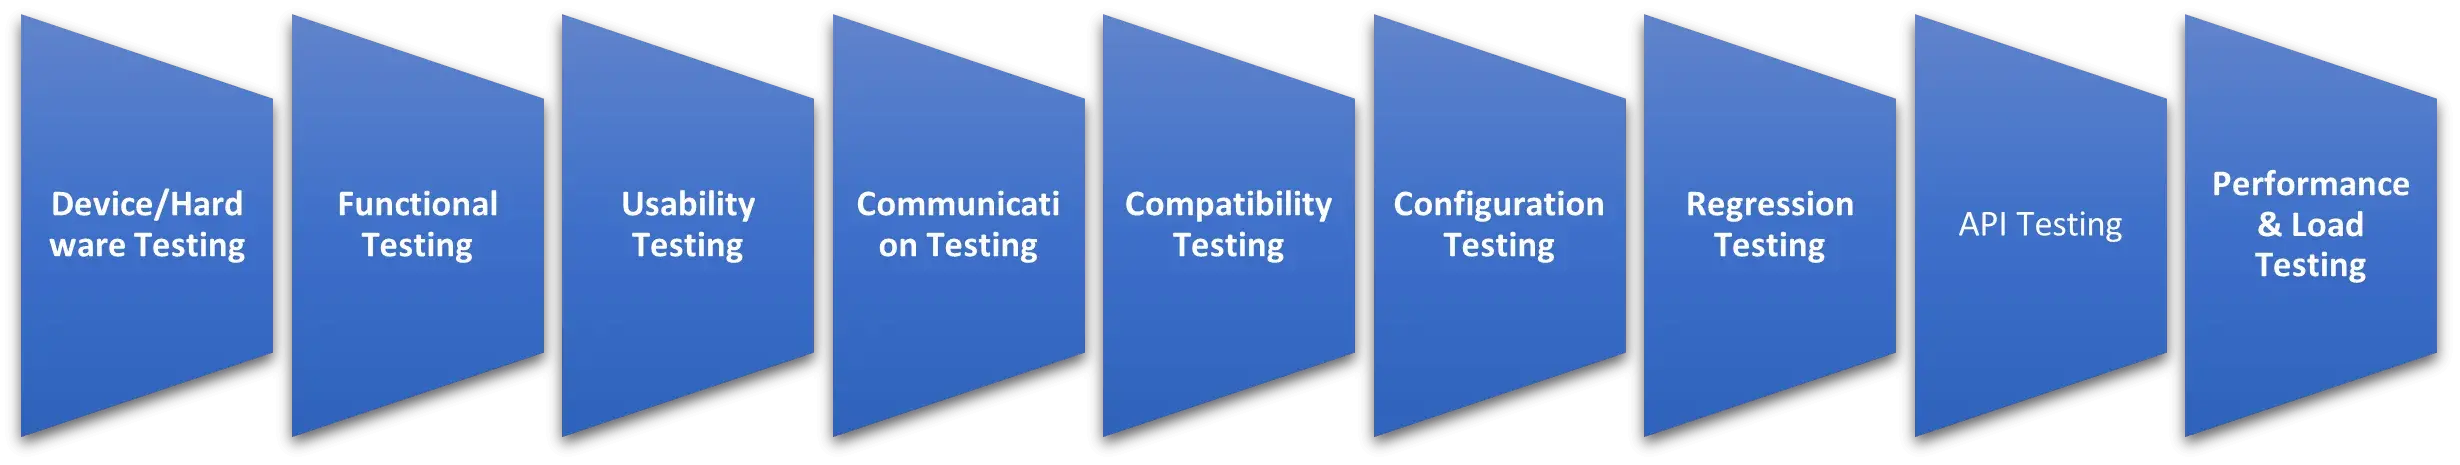 Types of Mobile Application Testing